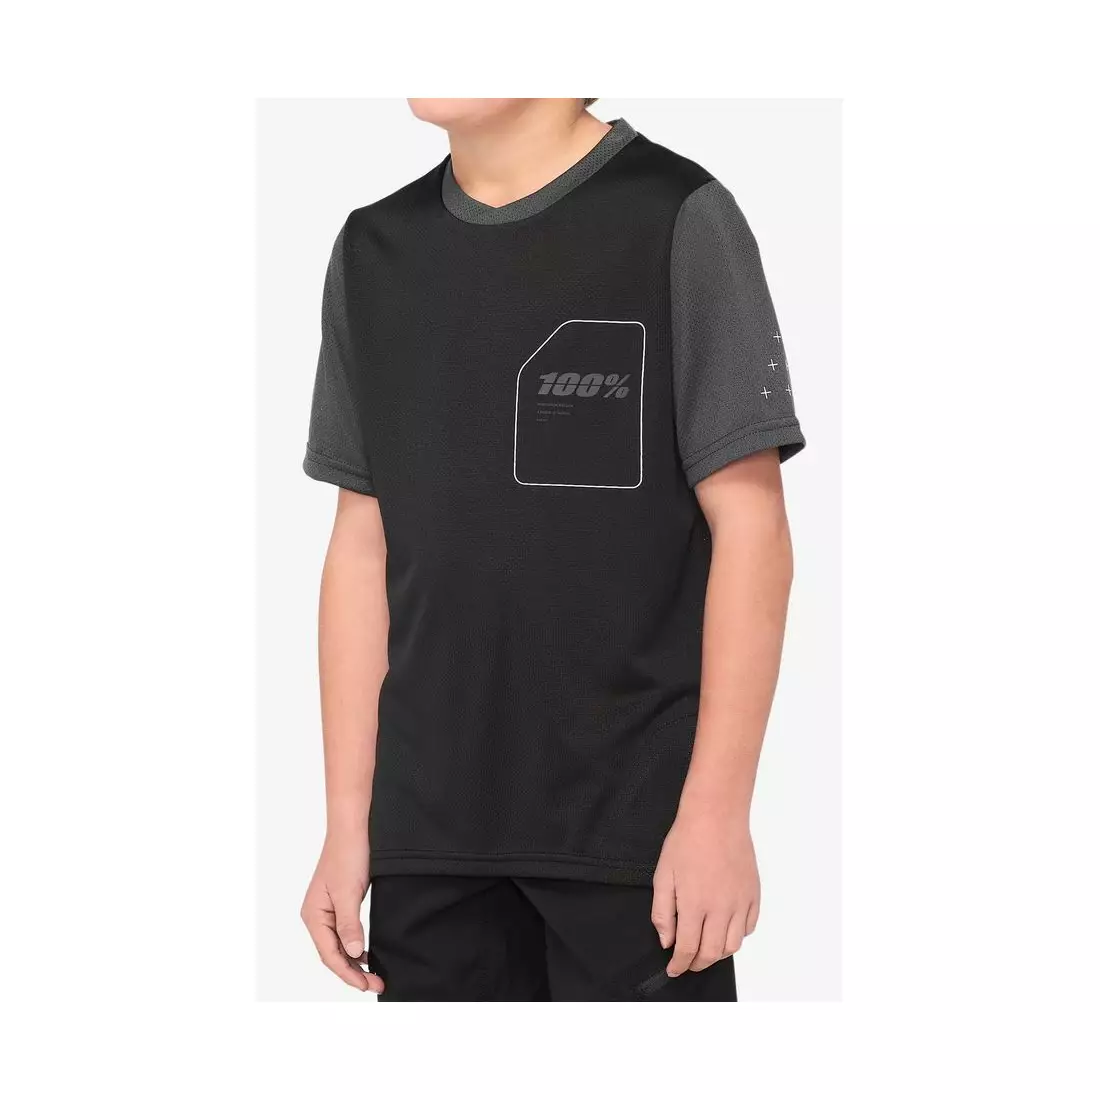 100% junior cycling jersey RIDECAMP black charcoal STO-46401-181-06